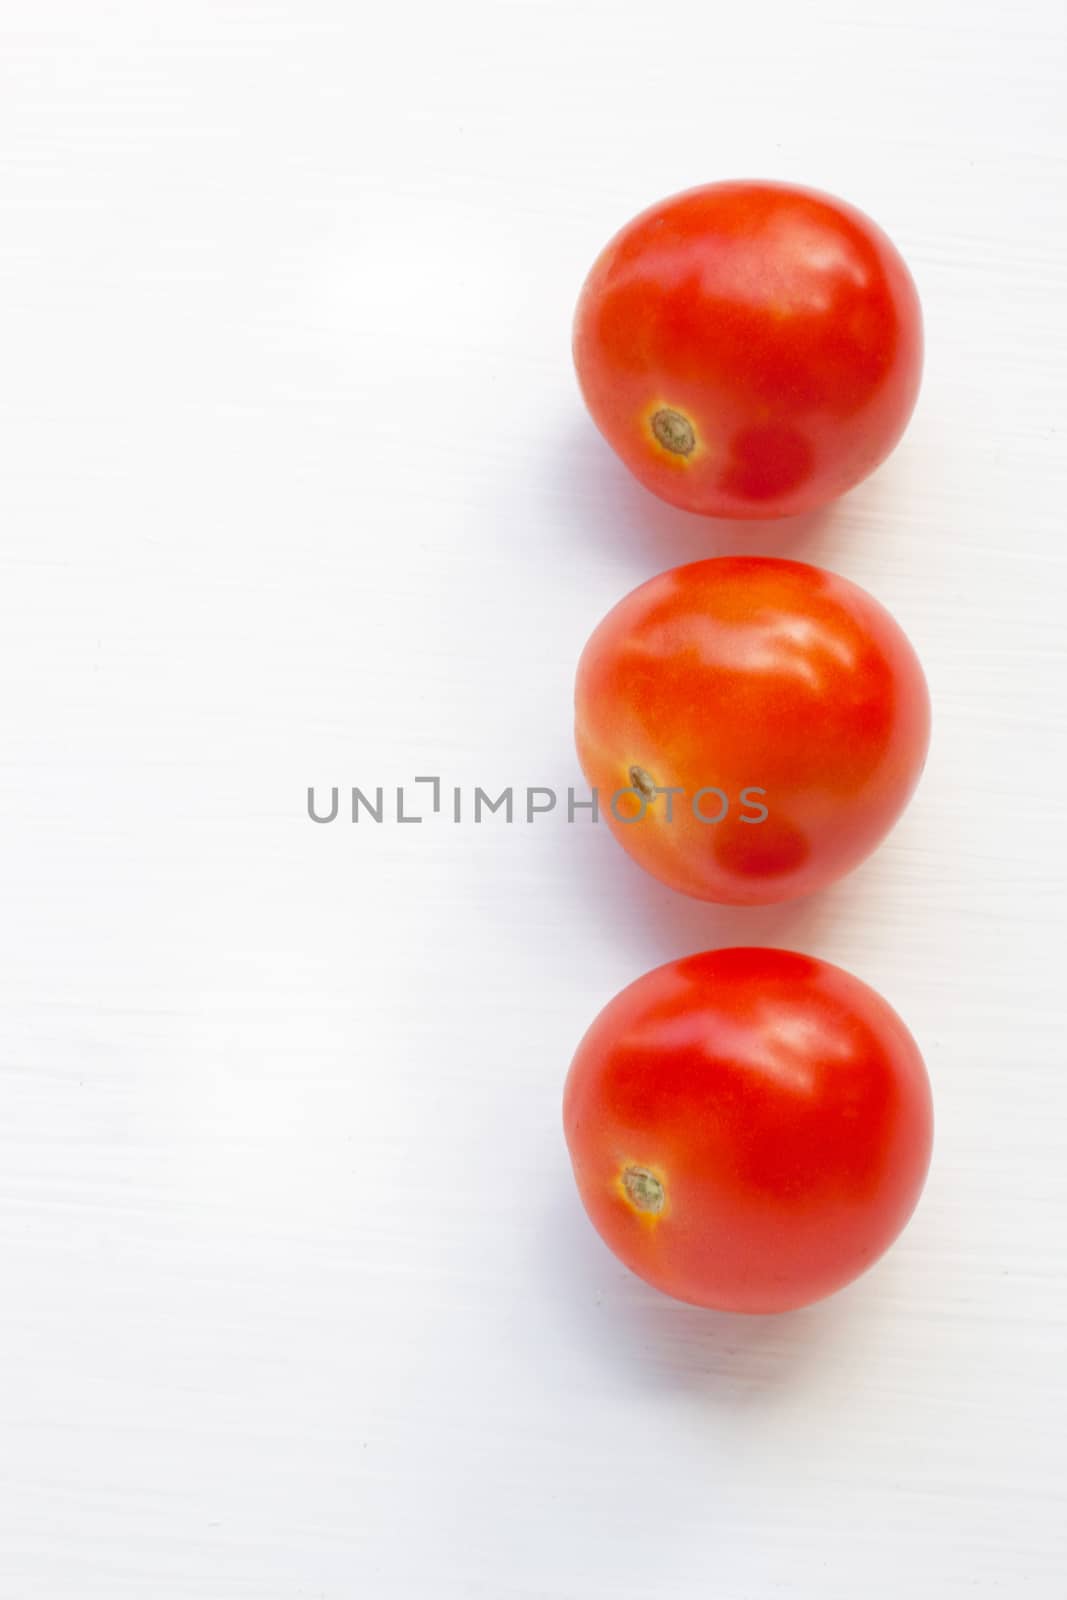 Tomatoes on white wooden background.